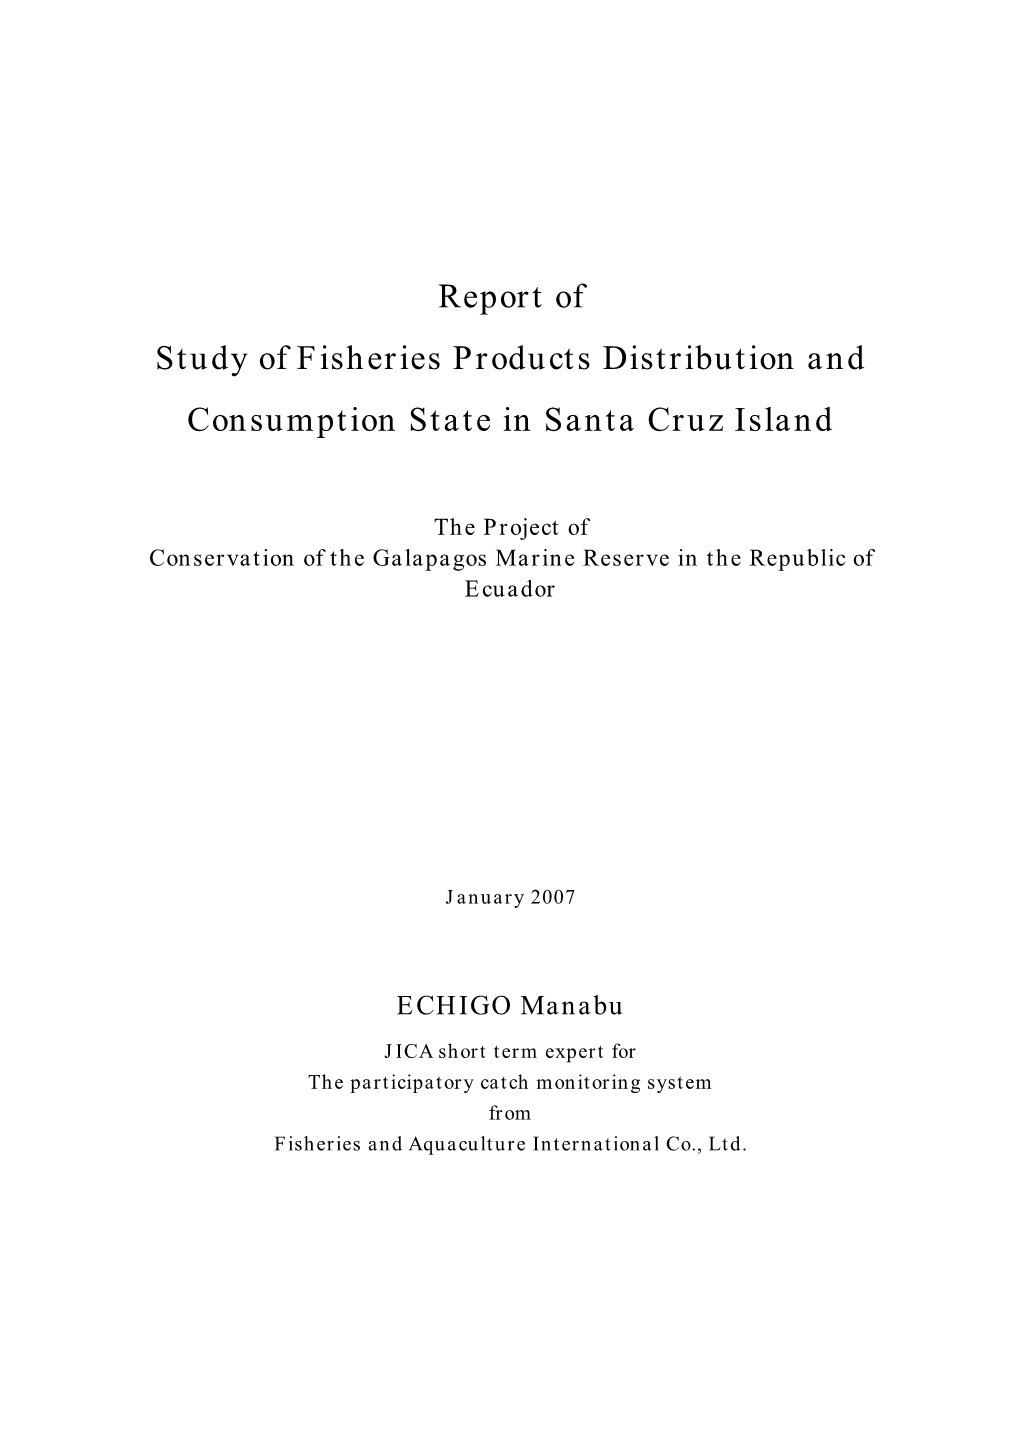 Report of Study of Fisheries Products Distribution and Consumption State in Santa Cruz Island